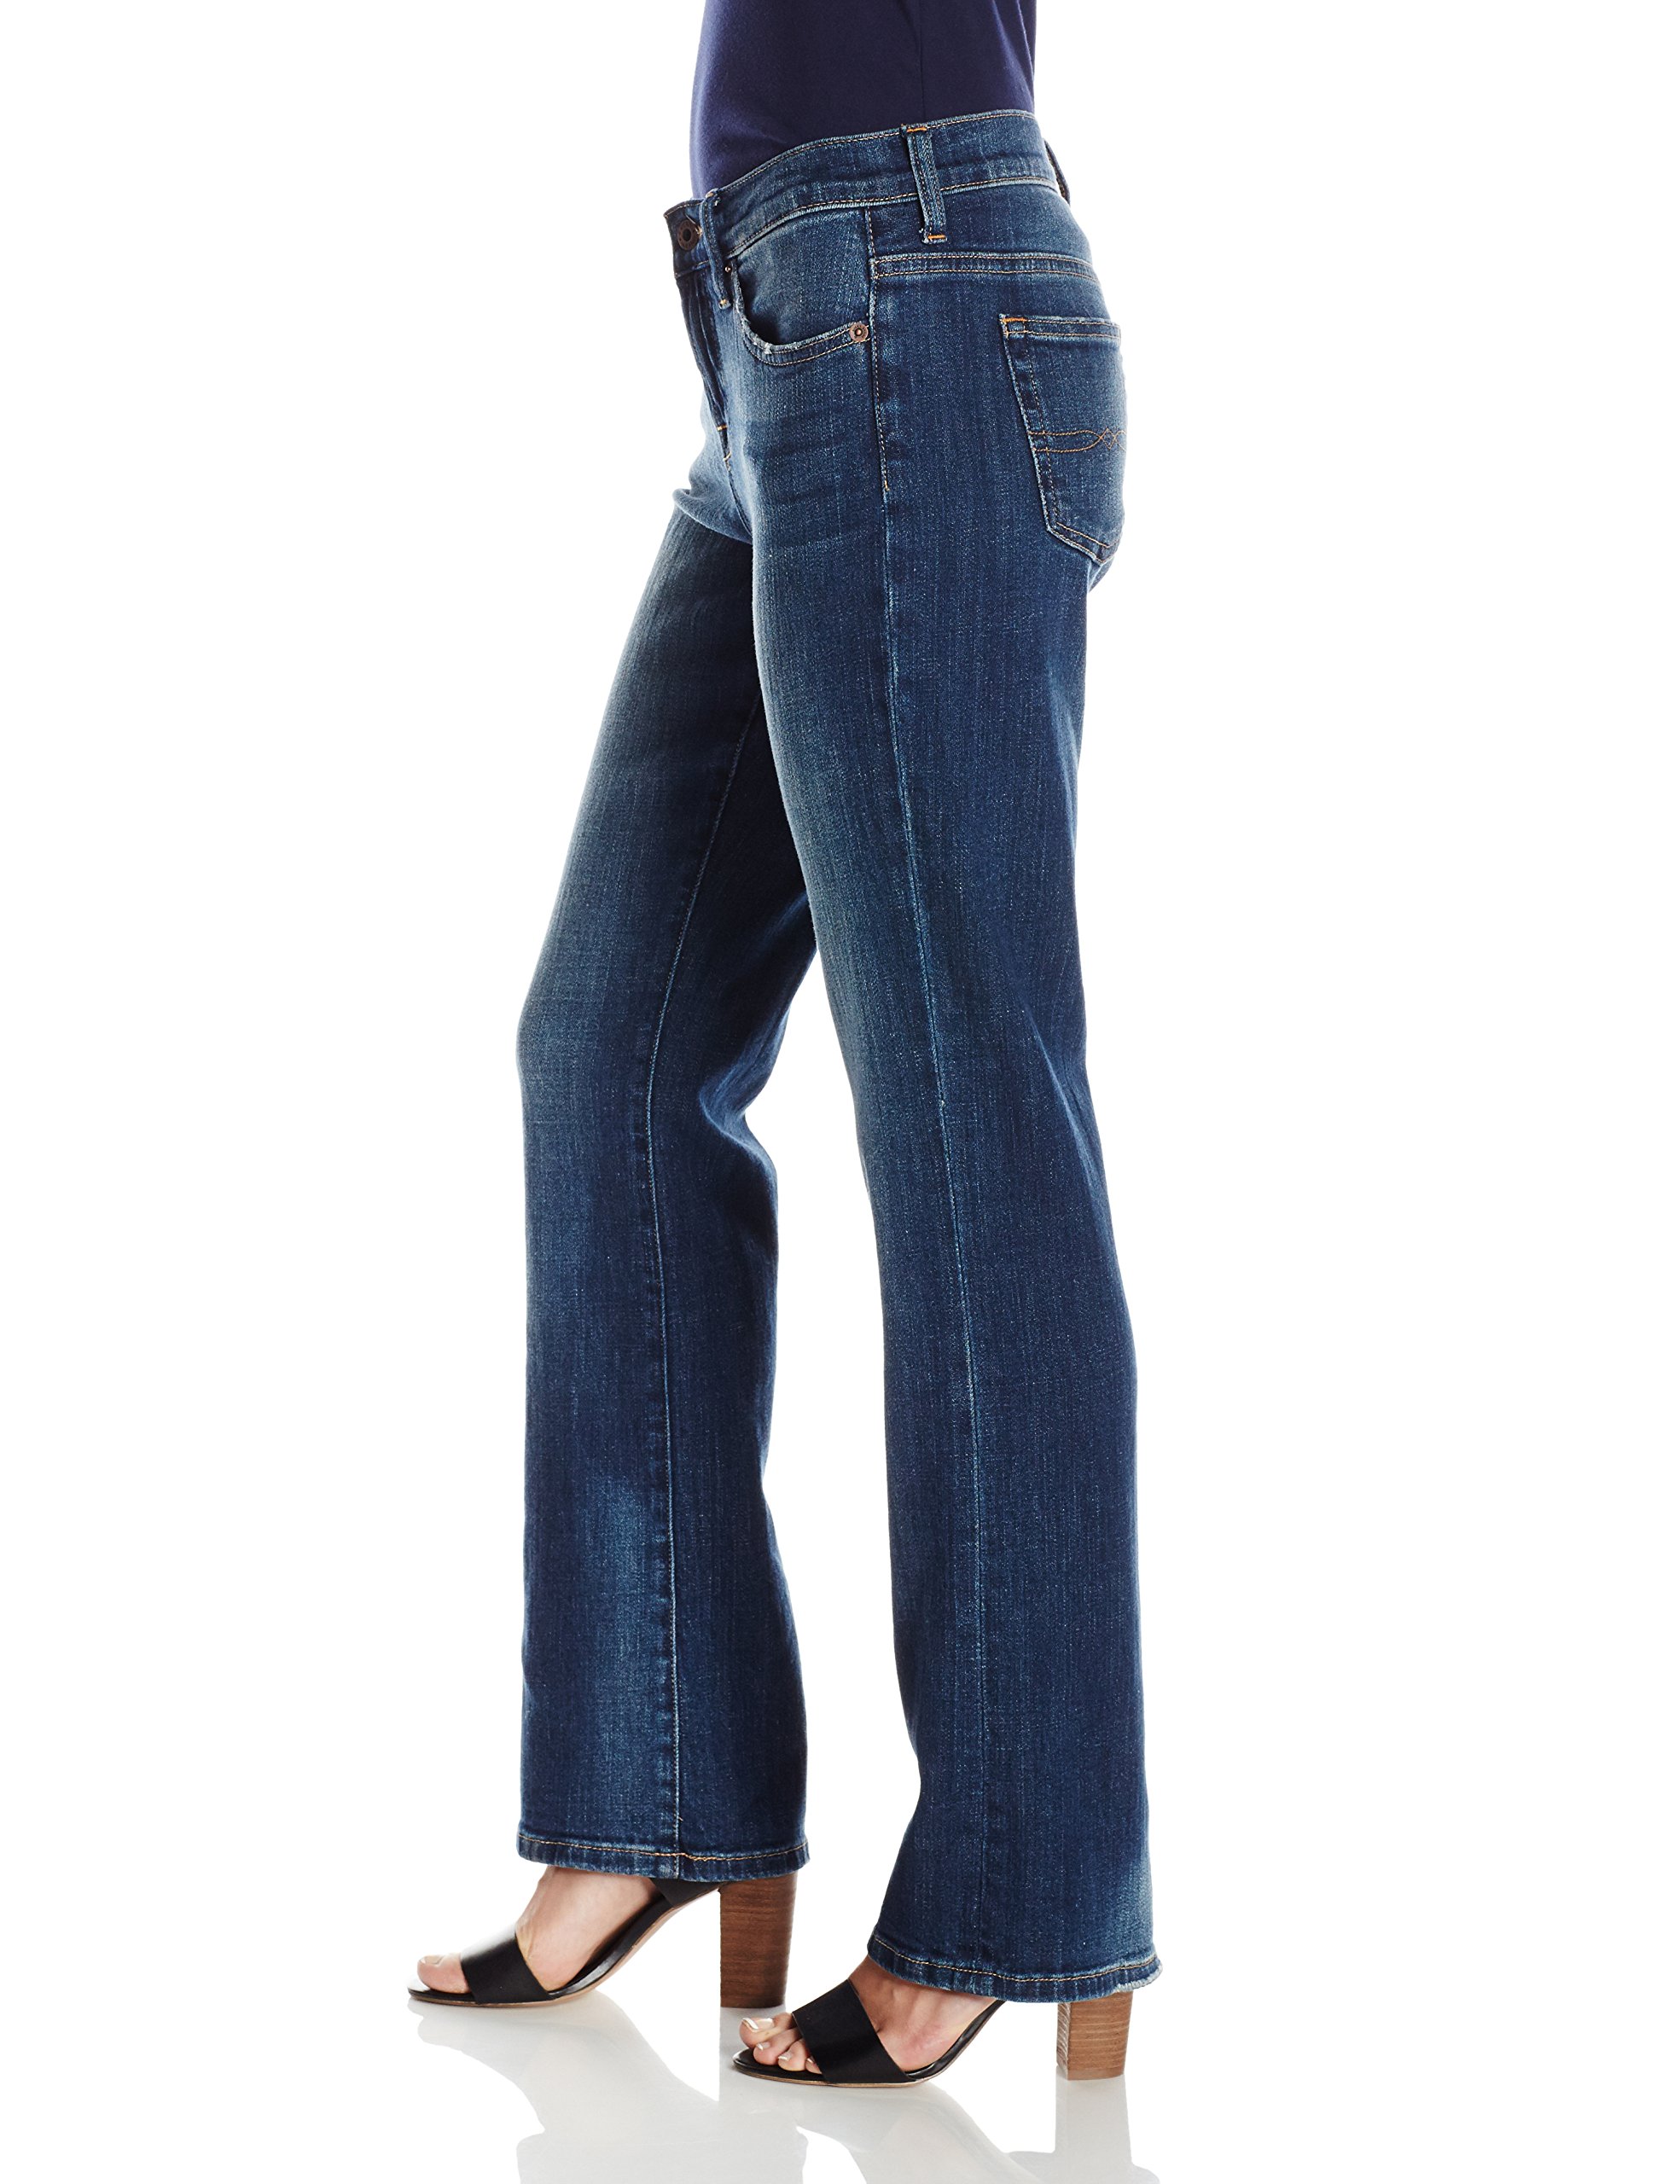 Lucky Brand Women's Easy Rider Bootcut Jeans Blue Size 25X32